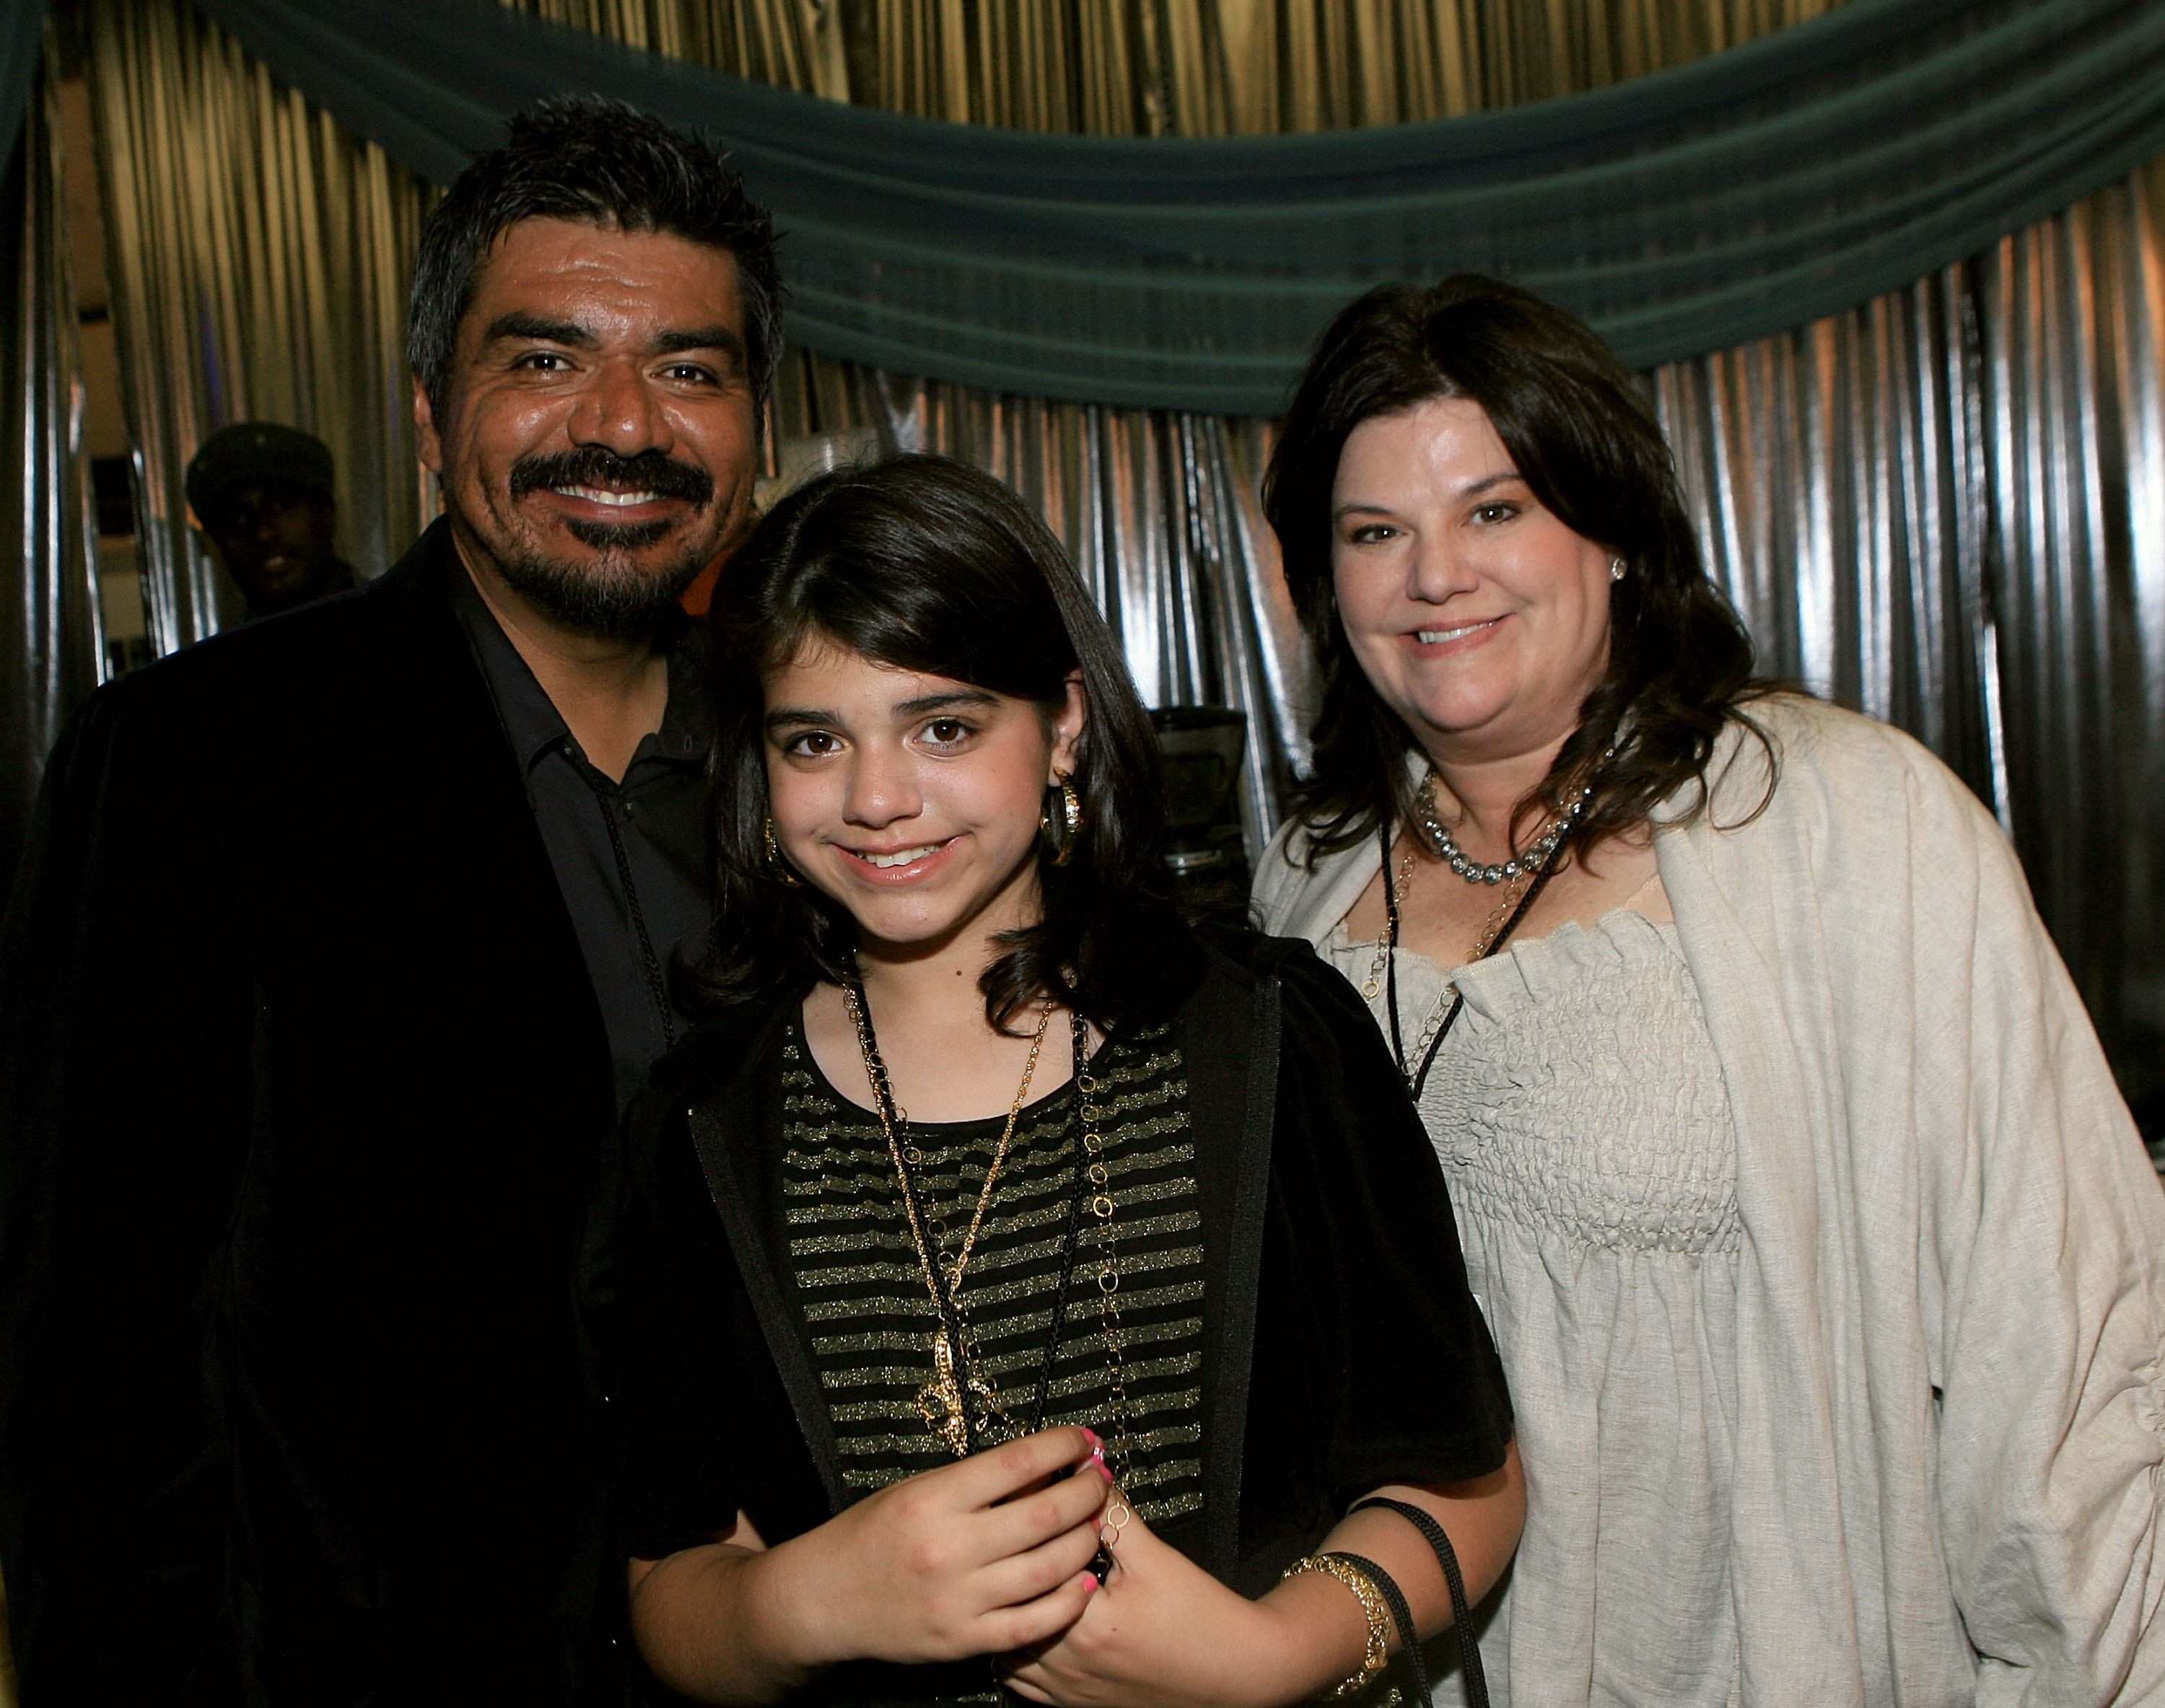 George Lopez, Mayan Lopez, and Ann Serrano during the 20th annual Kid's Choice Awards at Pauley Pavilion on March 31, 2007 in Los Angeles, California. | Source: Getty Images